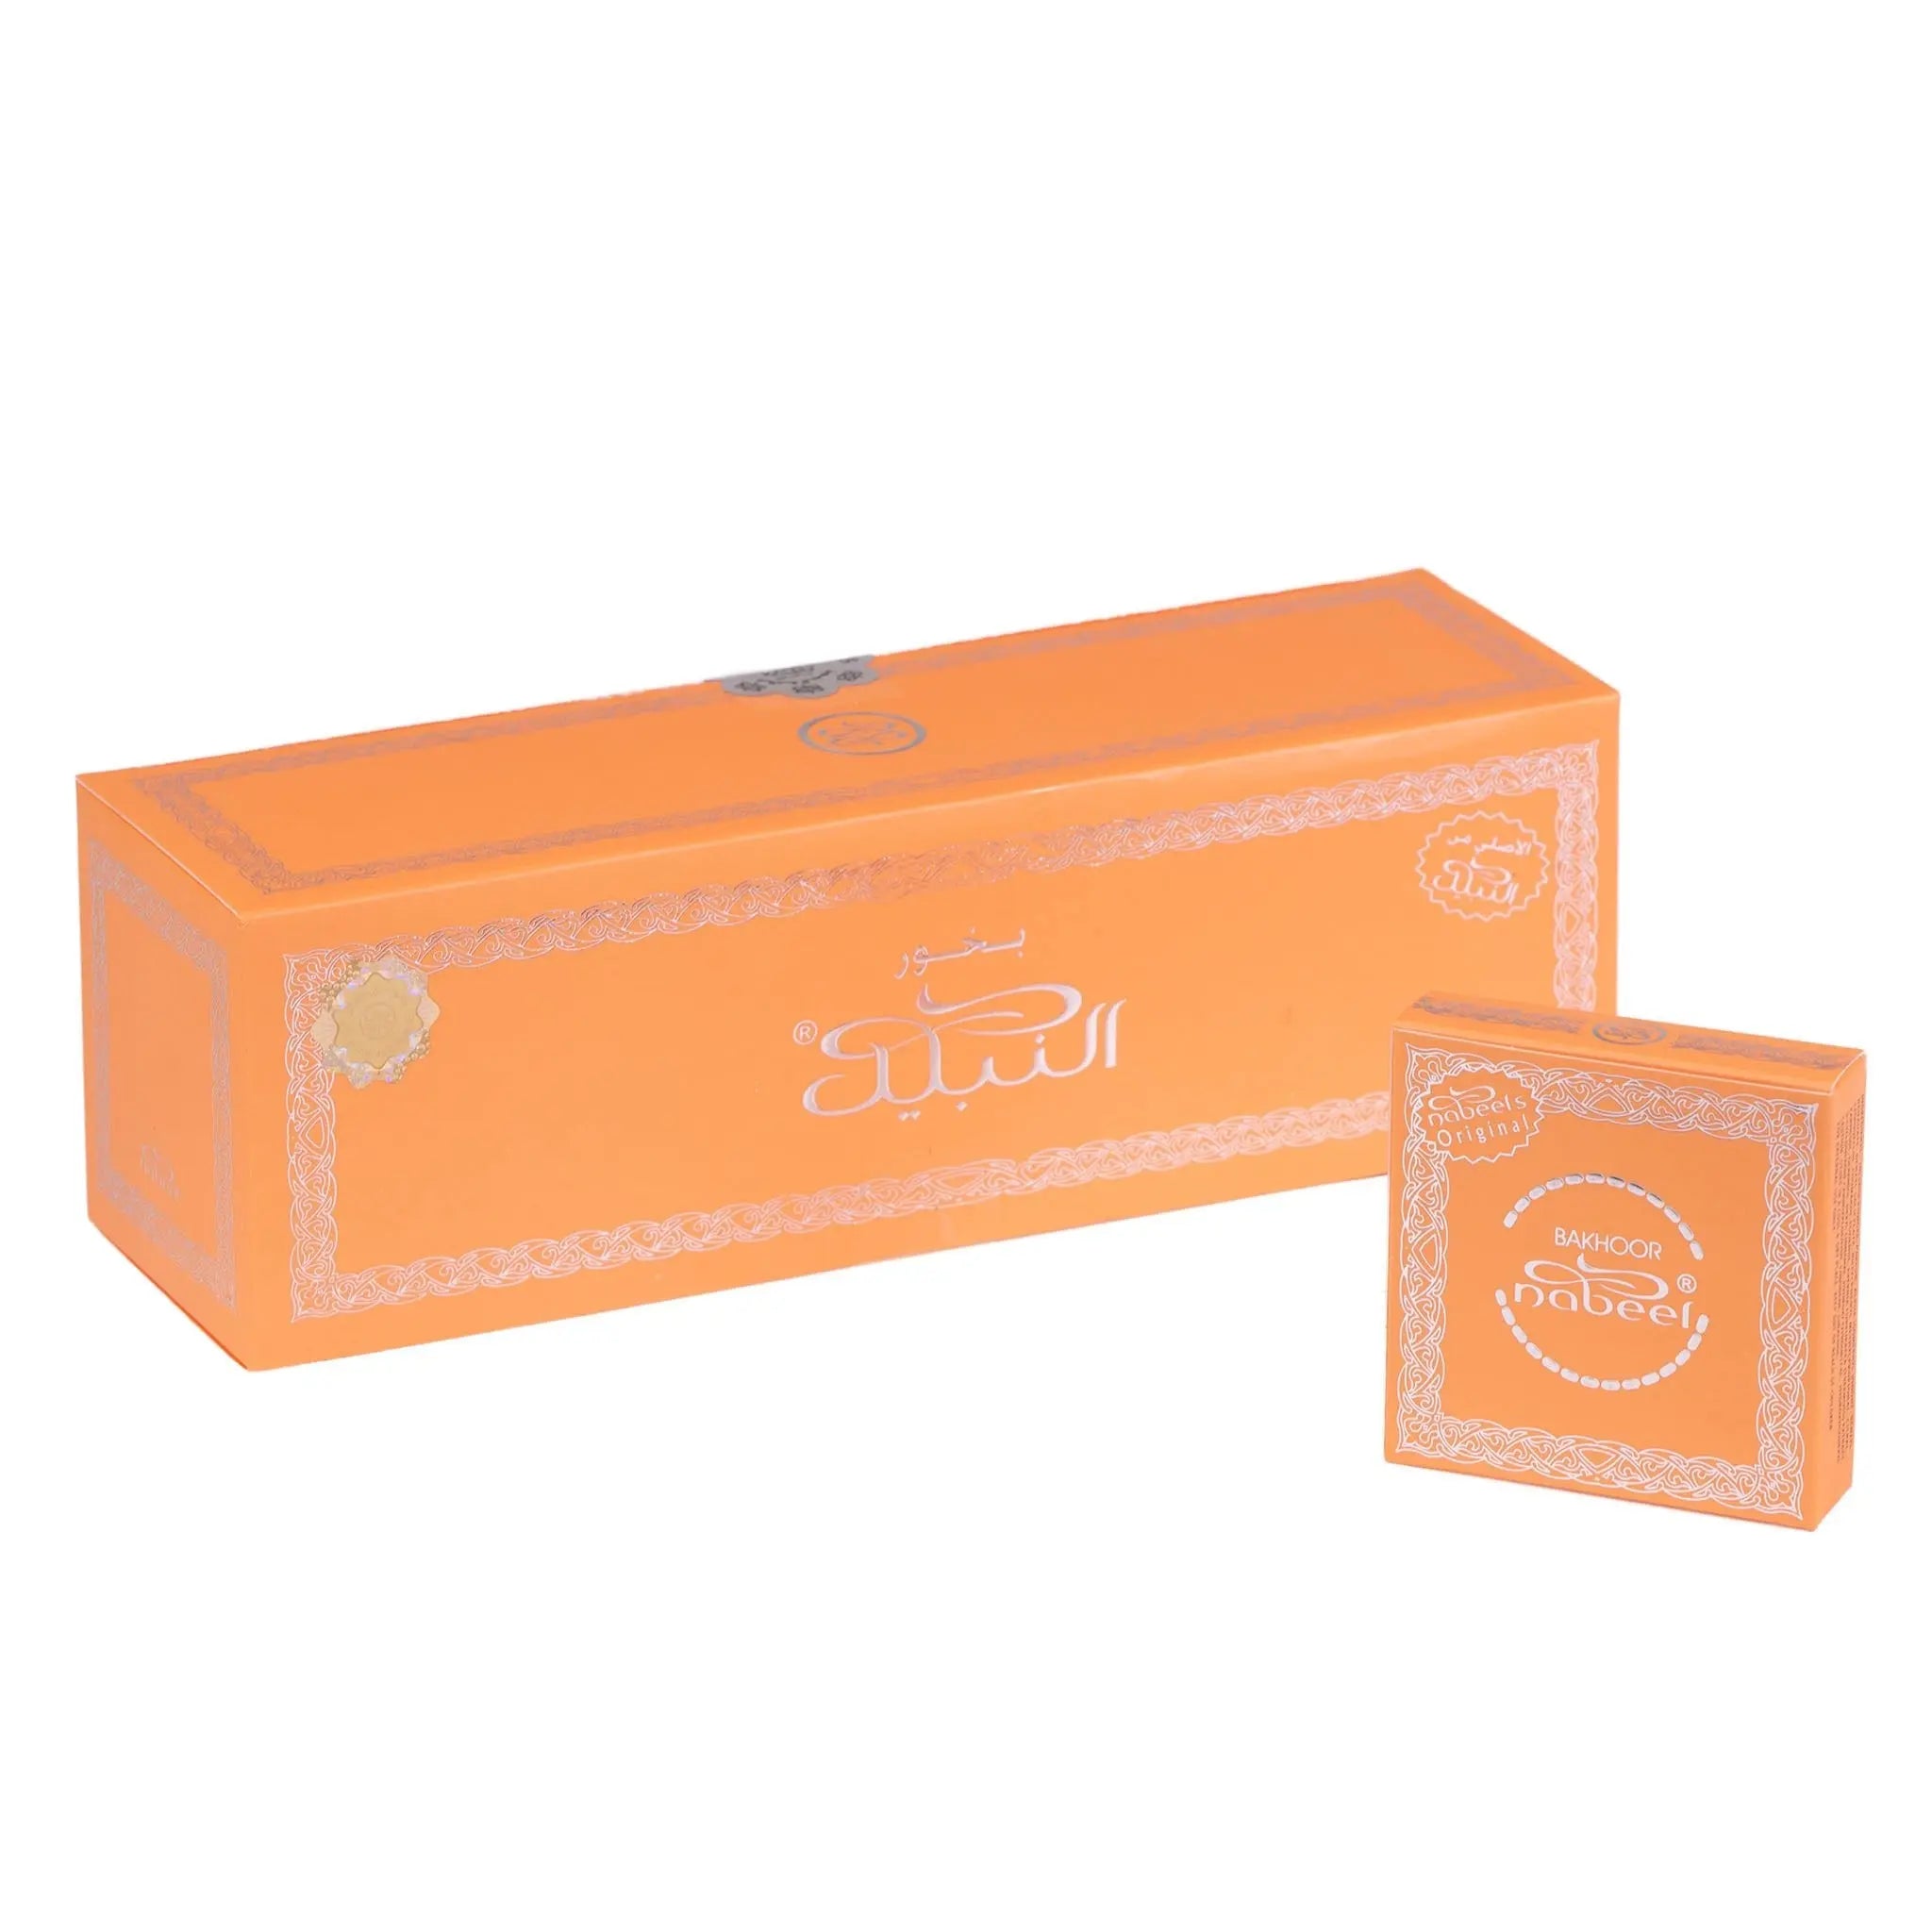 The image shows two boxes of 'Nabeel Bakhoor' incense products. The larger rectangular box and the smaller square box both have an orange background with intricate white lace patterns along the edges. Arabic script and the brand name "Nabeel" are written in white on the boxes, along with the English translation "Bakhoor Nabeel" below the Arabic text. The design of the packaging is elegant and suggests a luxurious home fragrance product with Middle Eastern influences.